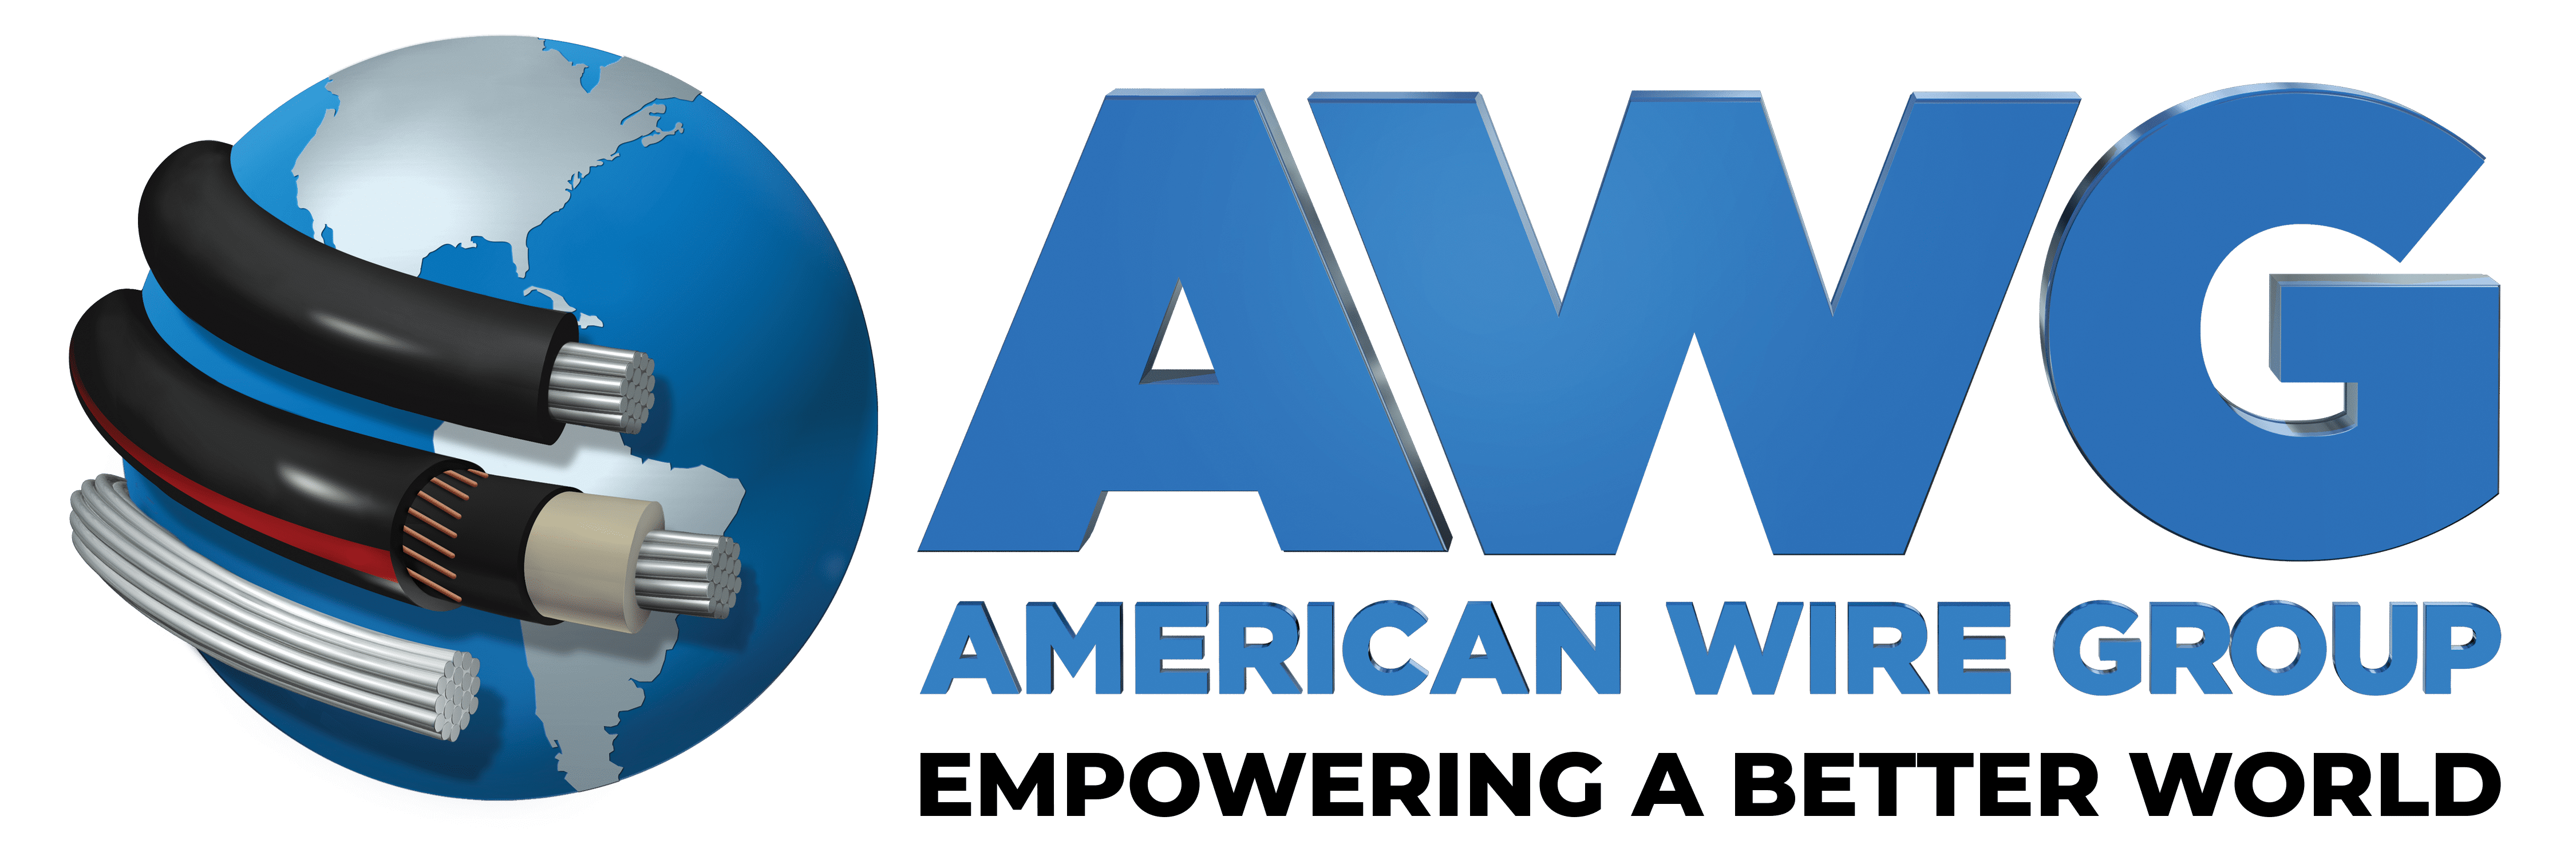 American Wire Group logo